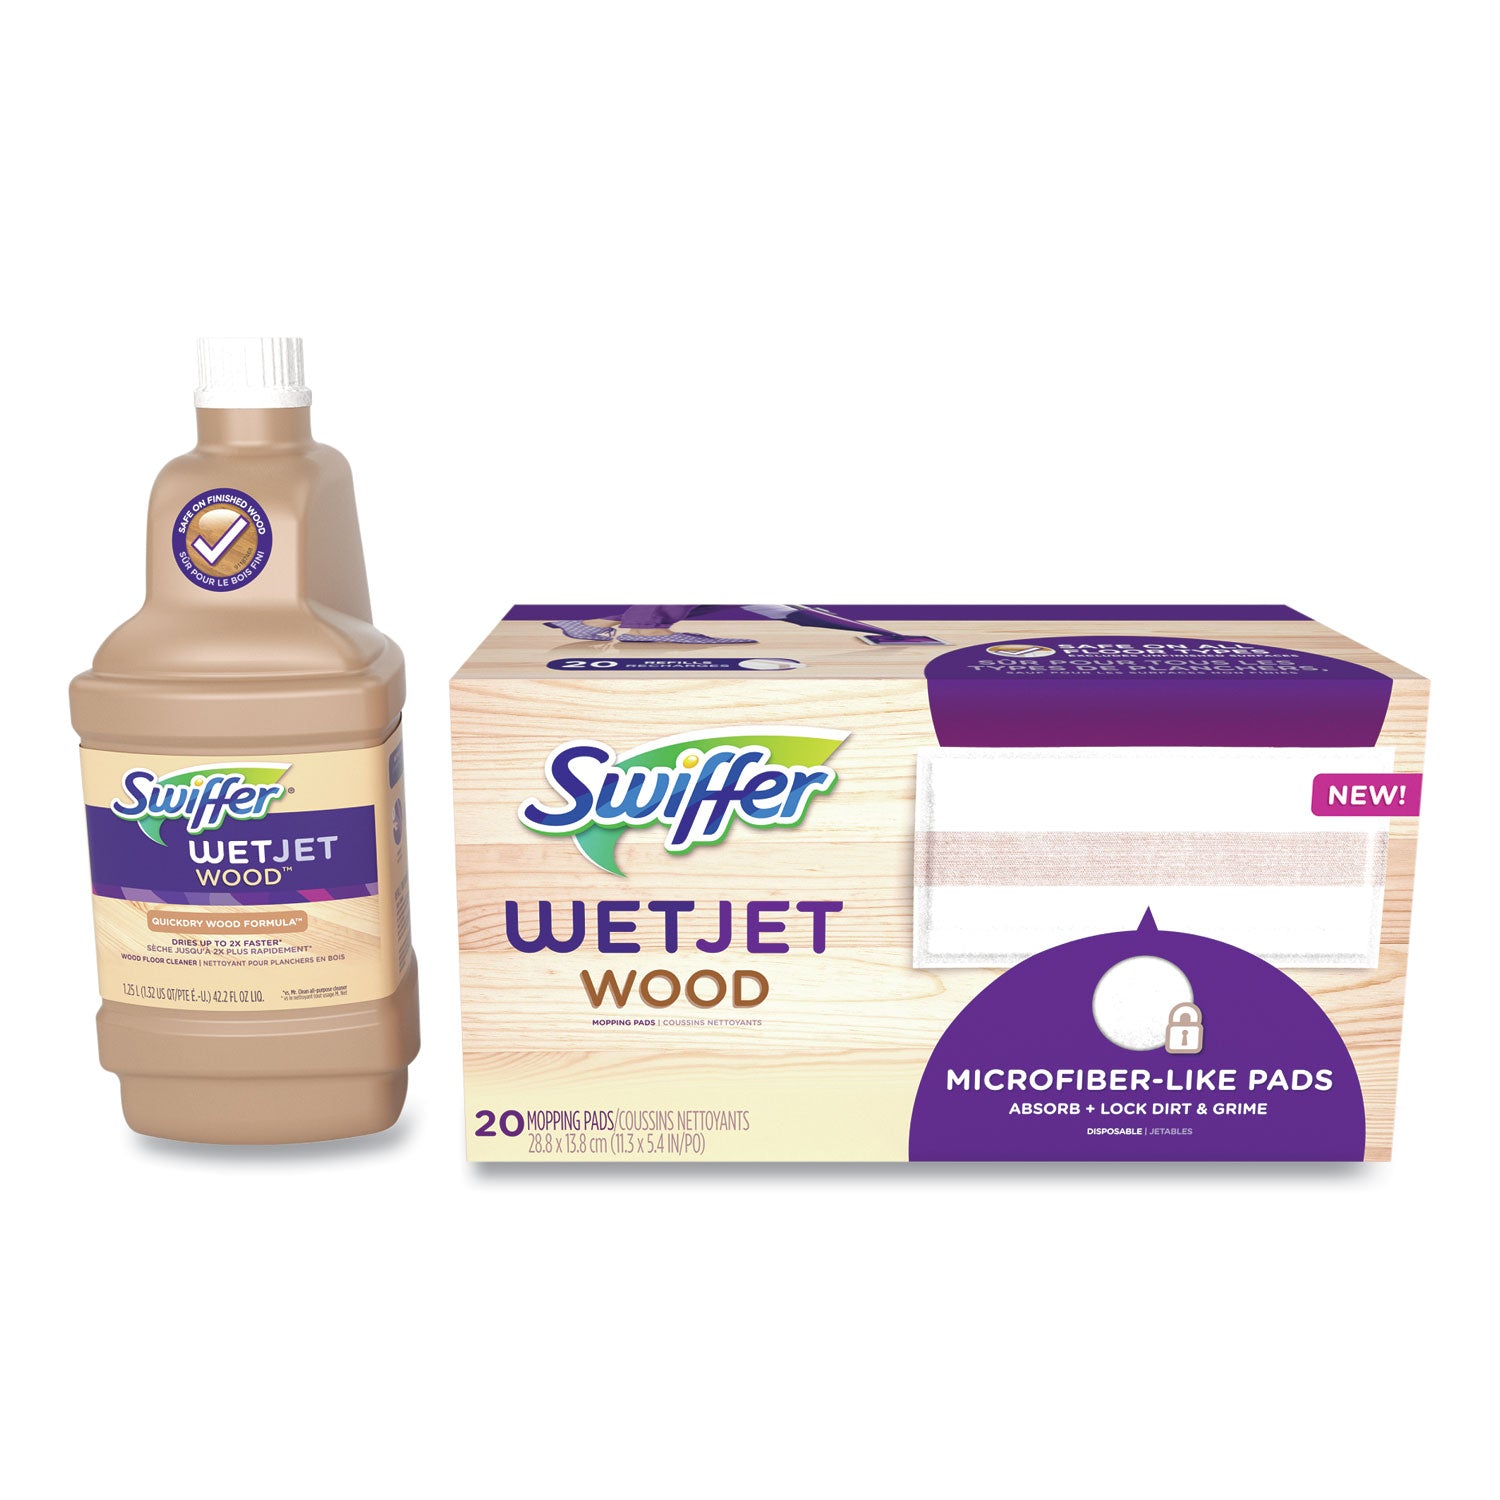 wetjet-system-wood-cleaning-solution-refill-with-mopping-pads-unscented-125-l-bottle_pgc77134 - 1